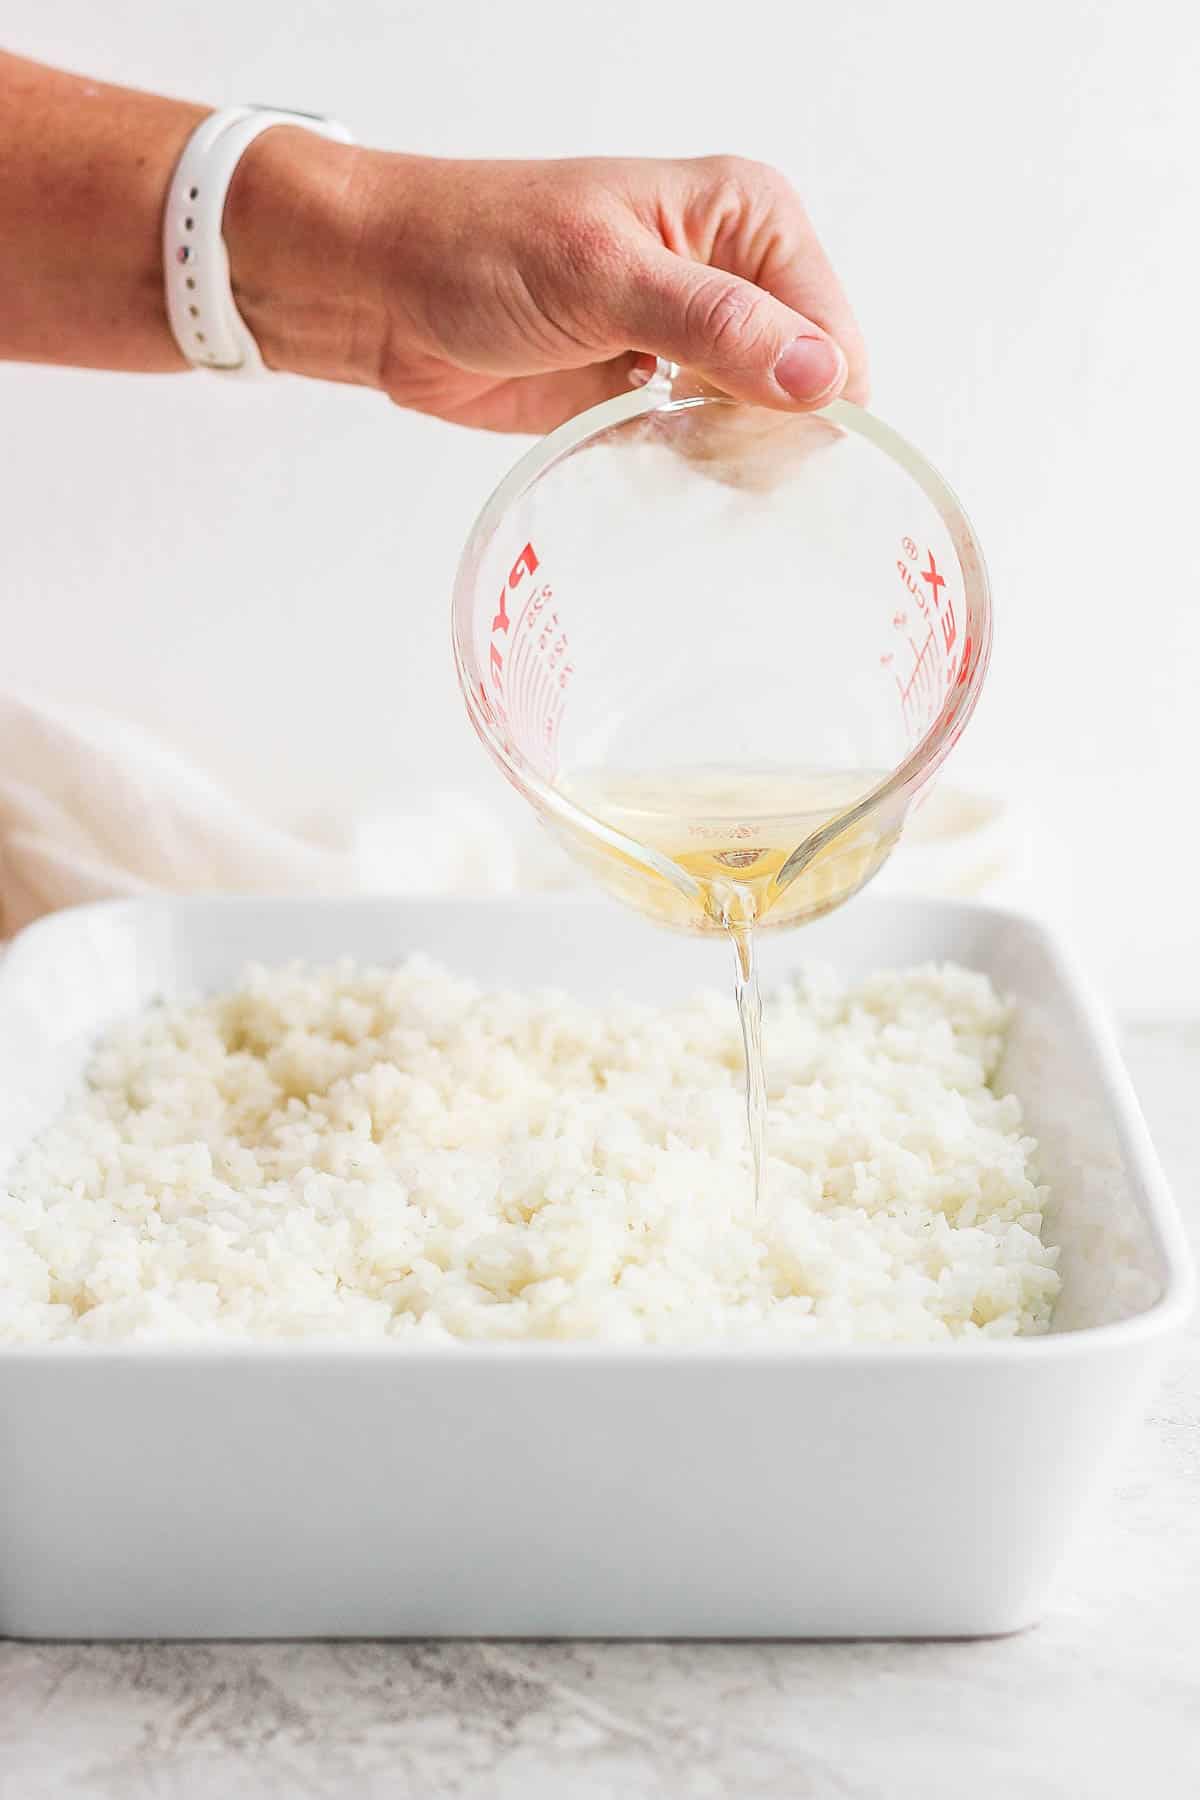 Sushi vinegar being poured on top of the cooked rice.